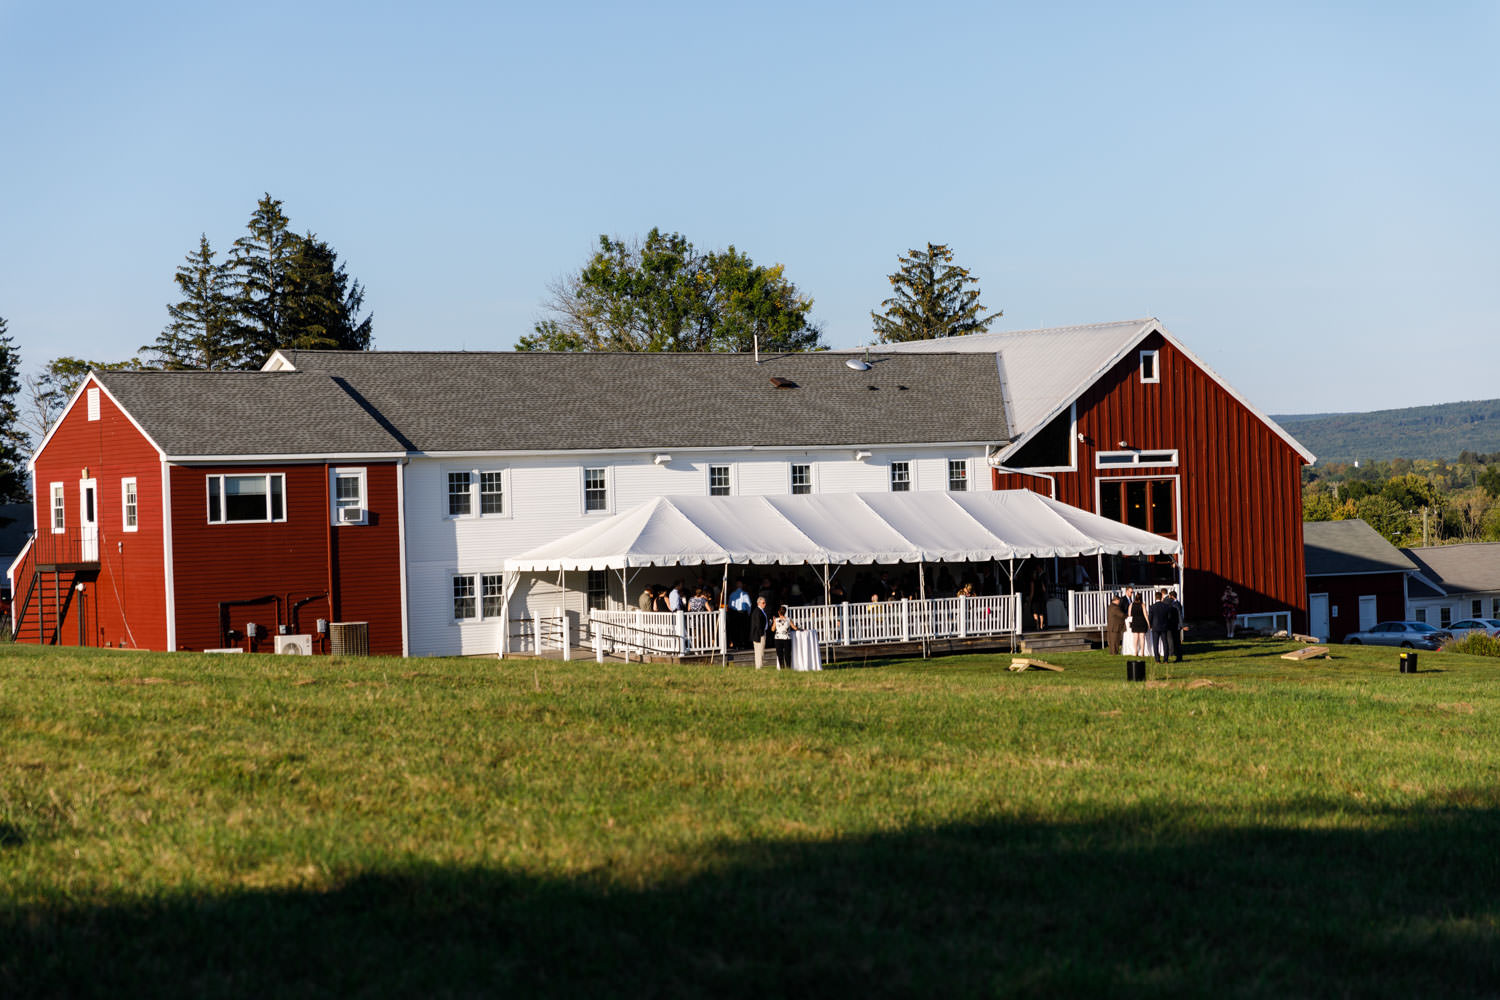 Outside photo of the Red Barn and patio space